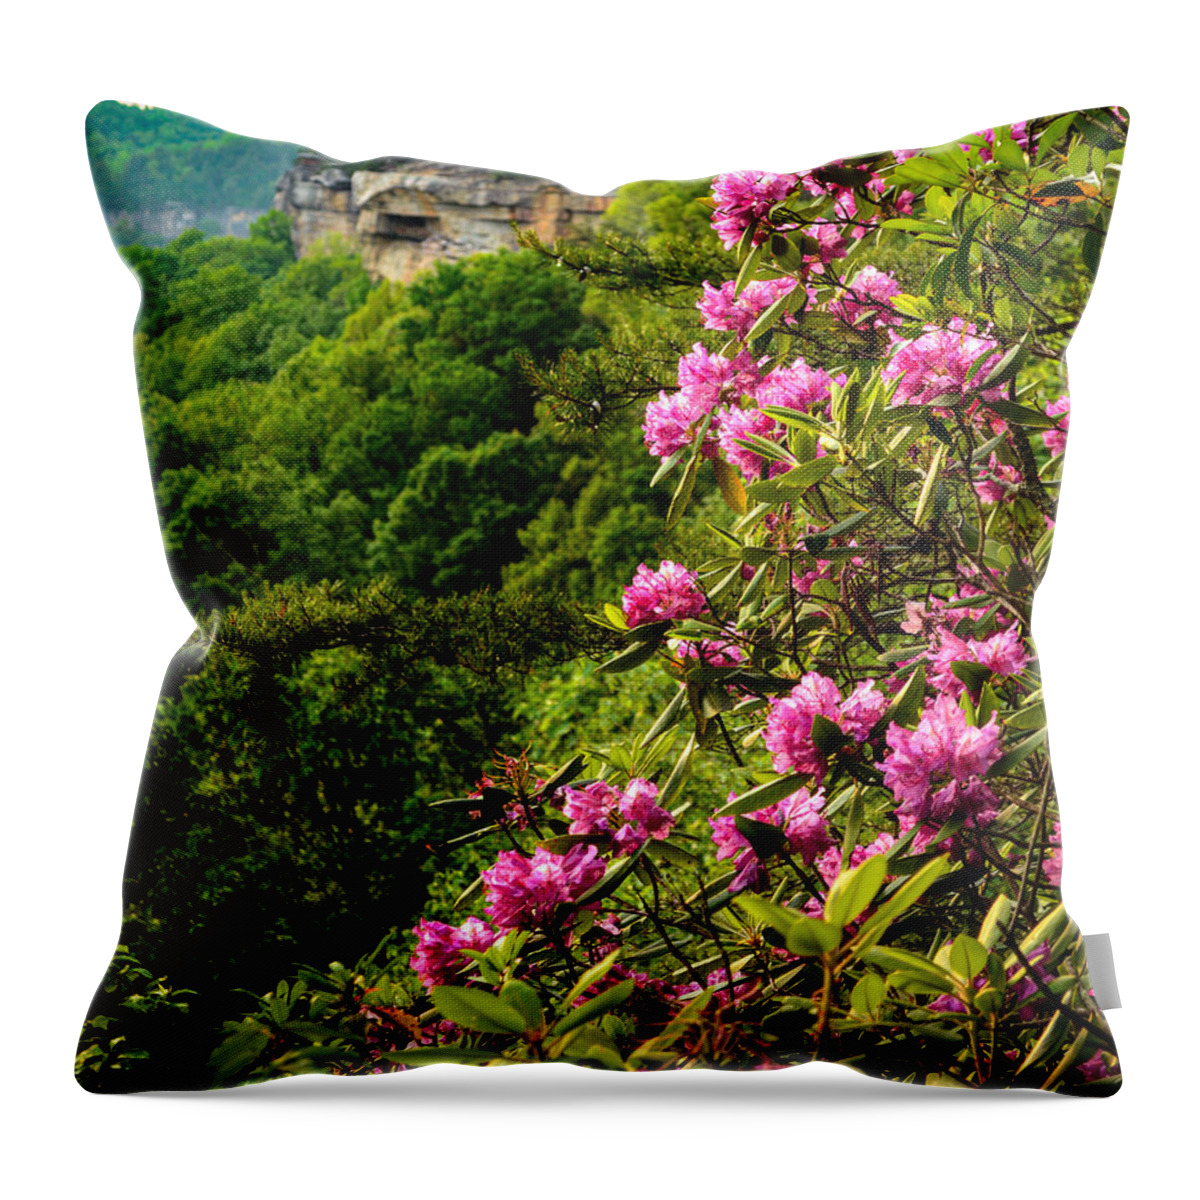 River Throw Pillow featuring the photograph Forest Blooms by Lisa Lambert-Shank